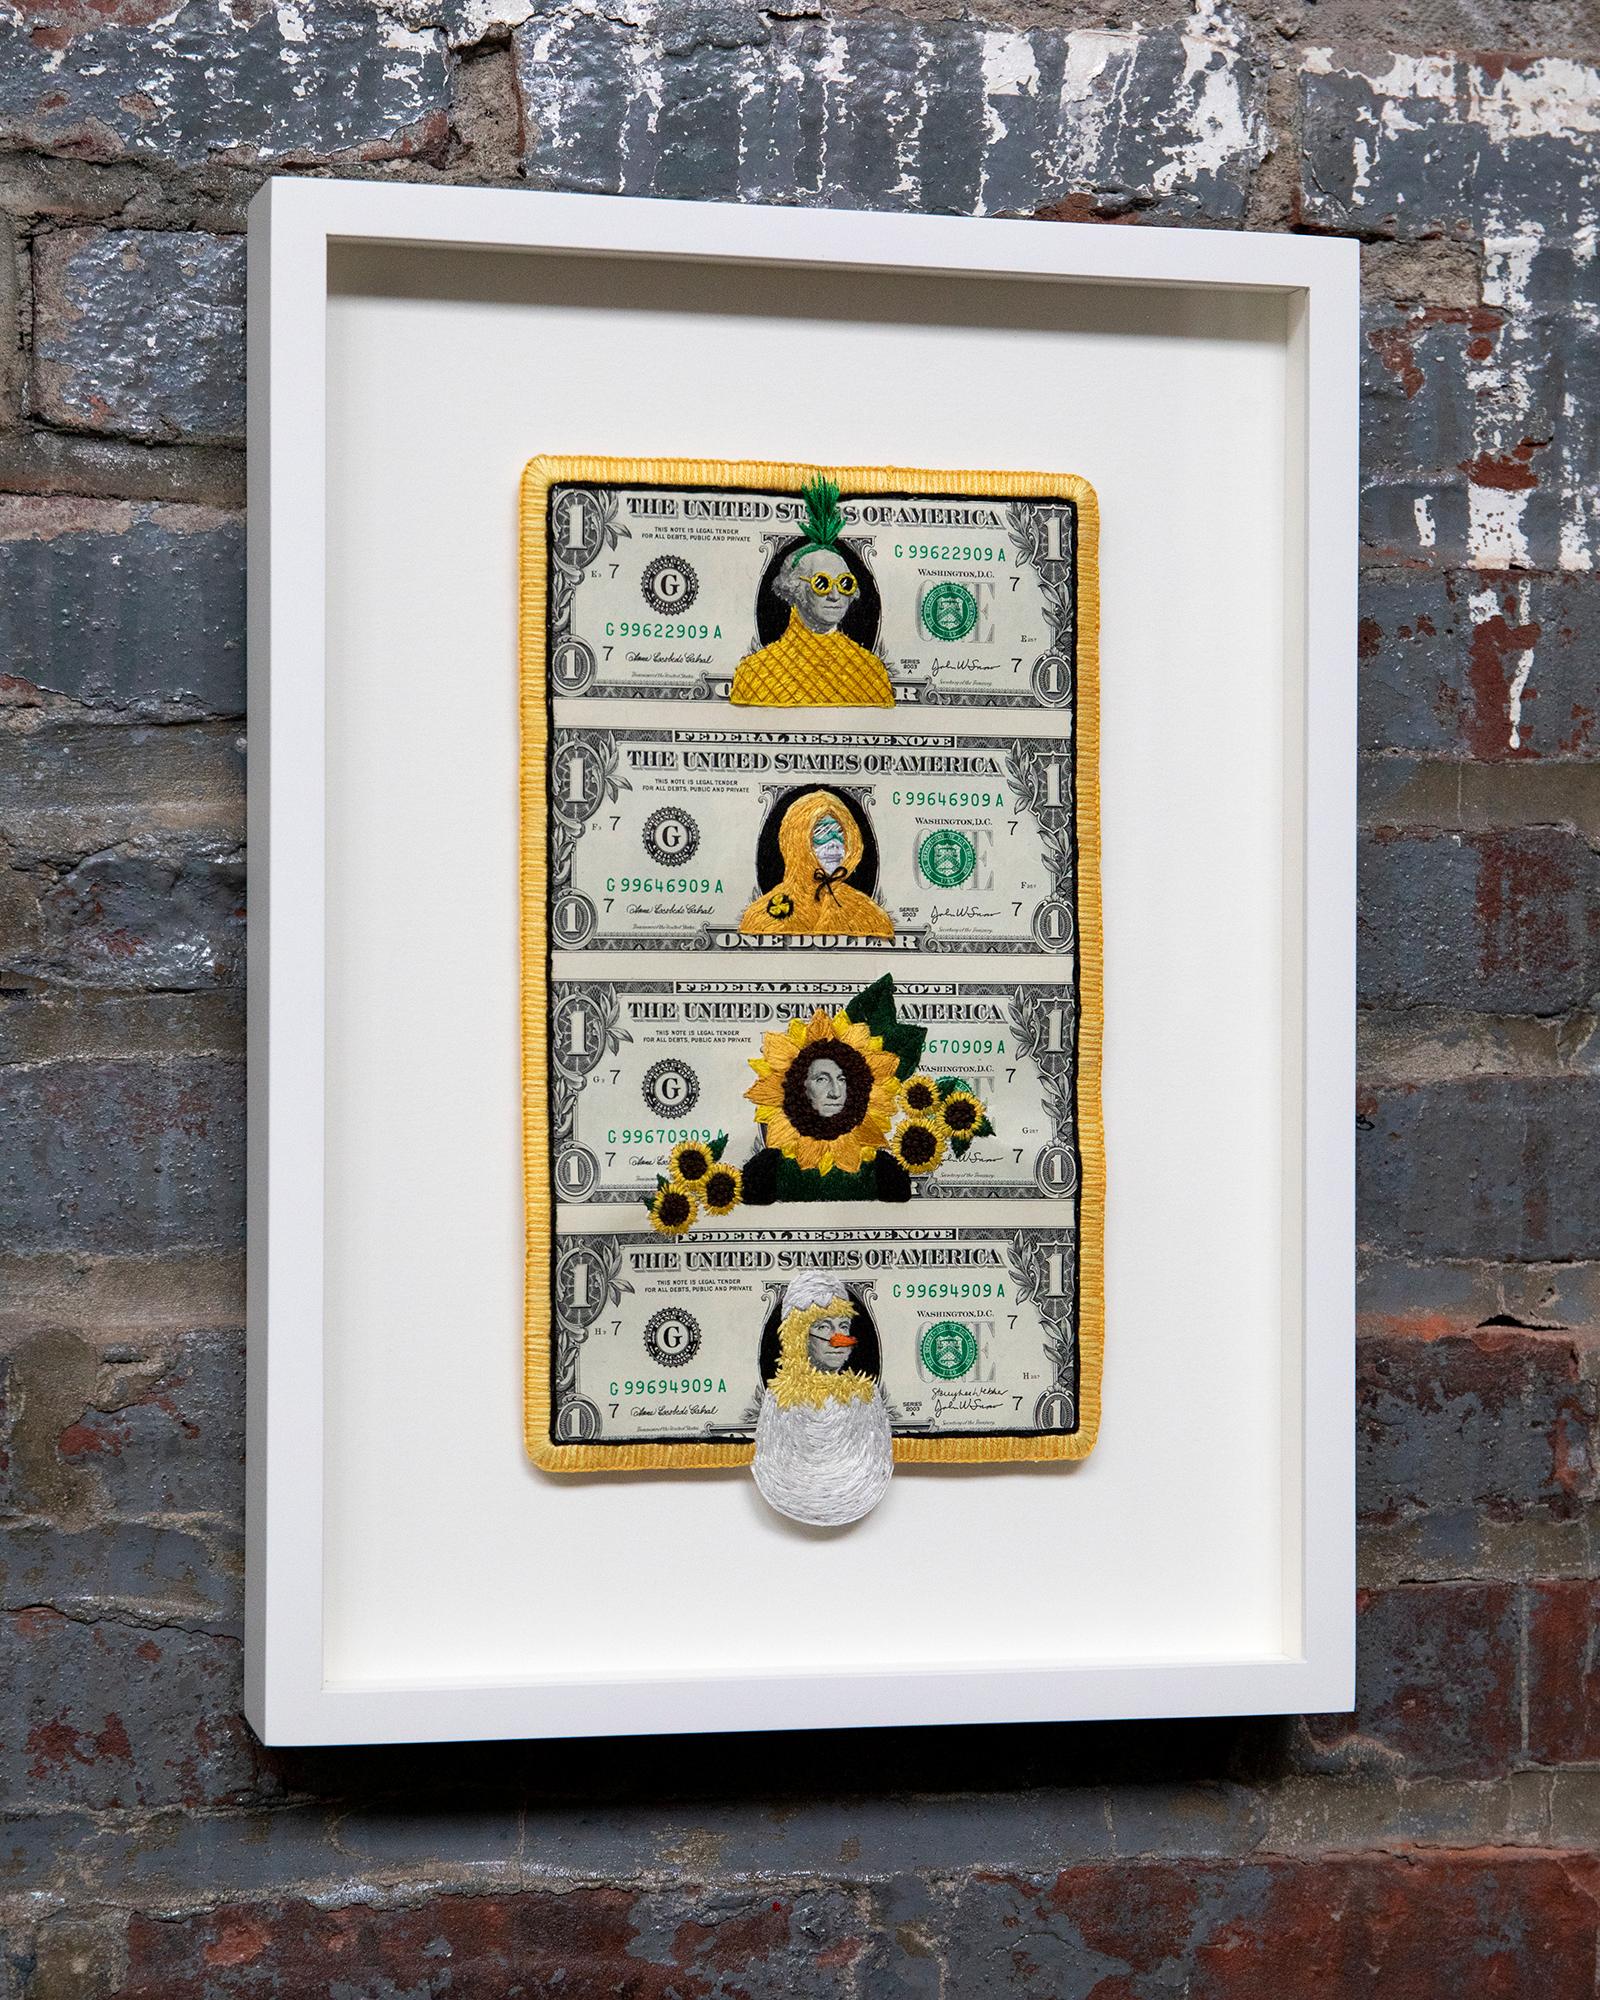 Stacey Lee Webber

Rainbow Costumes: Yellow Washington

15.75” x 11.5” 

handstitched cotton thread, uncut 1x4 US one dollar bills, framed, glass face

2022